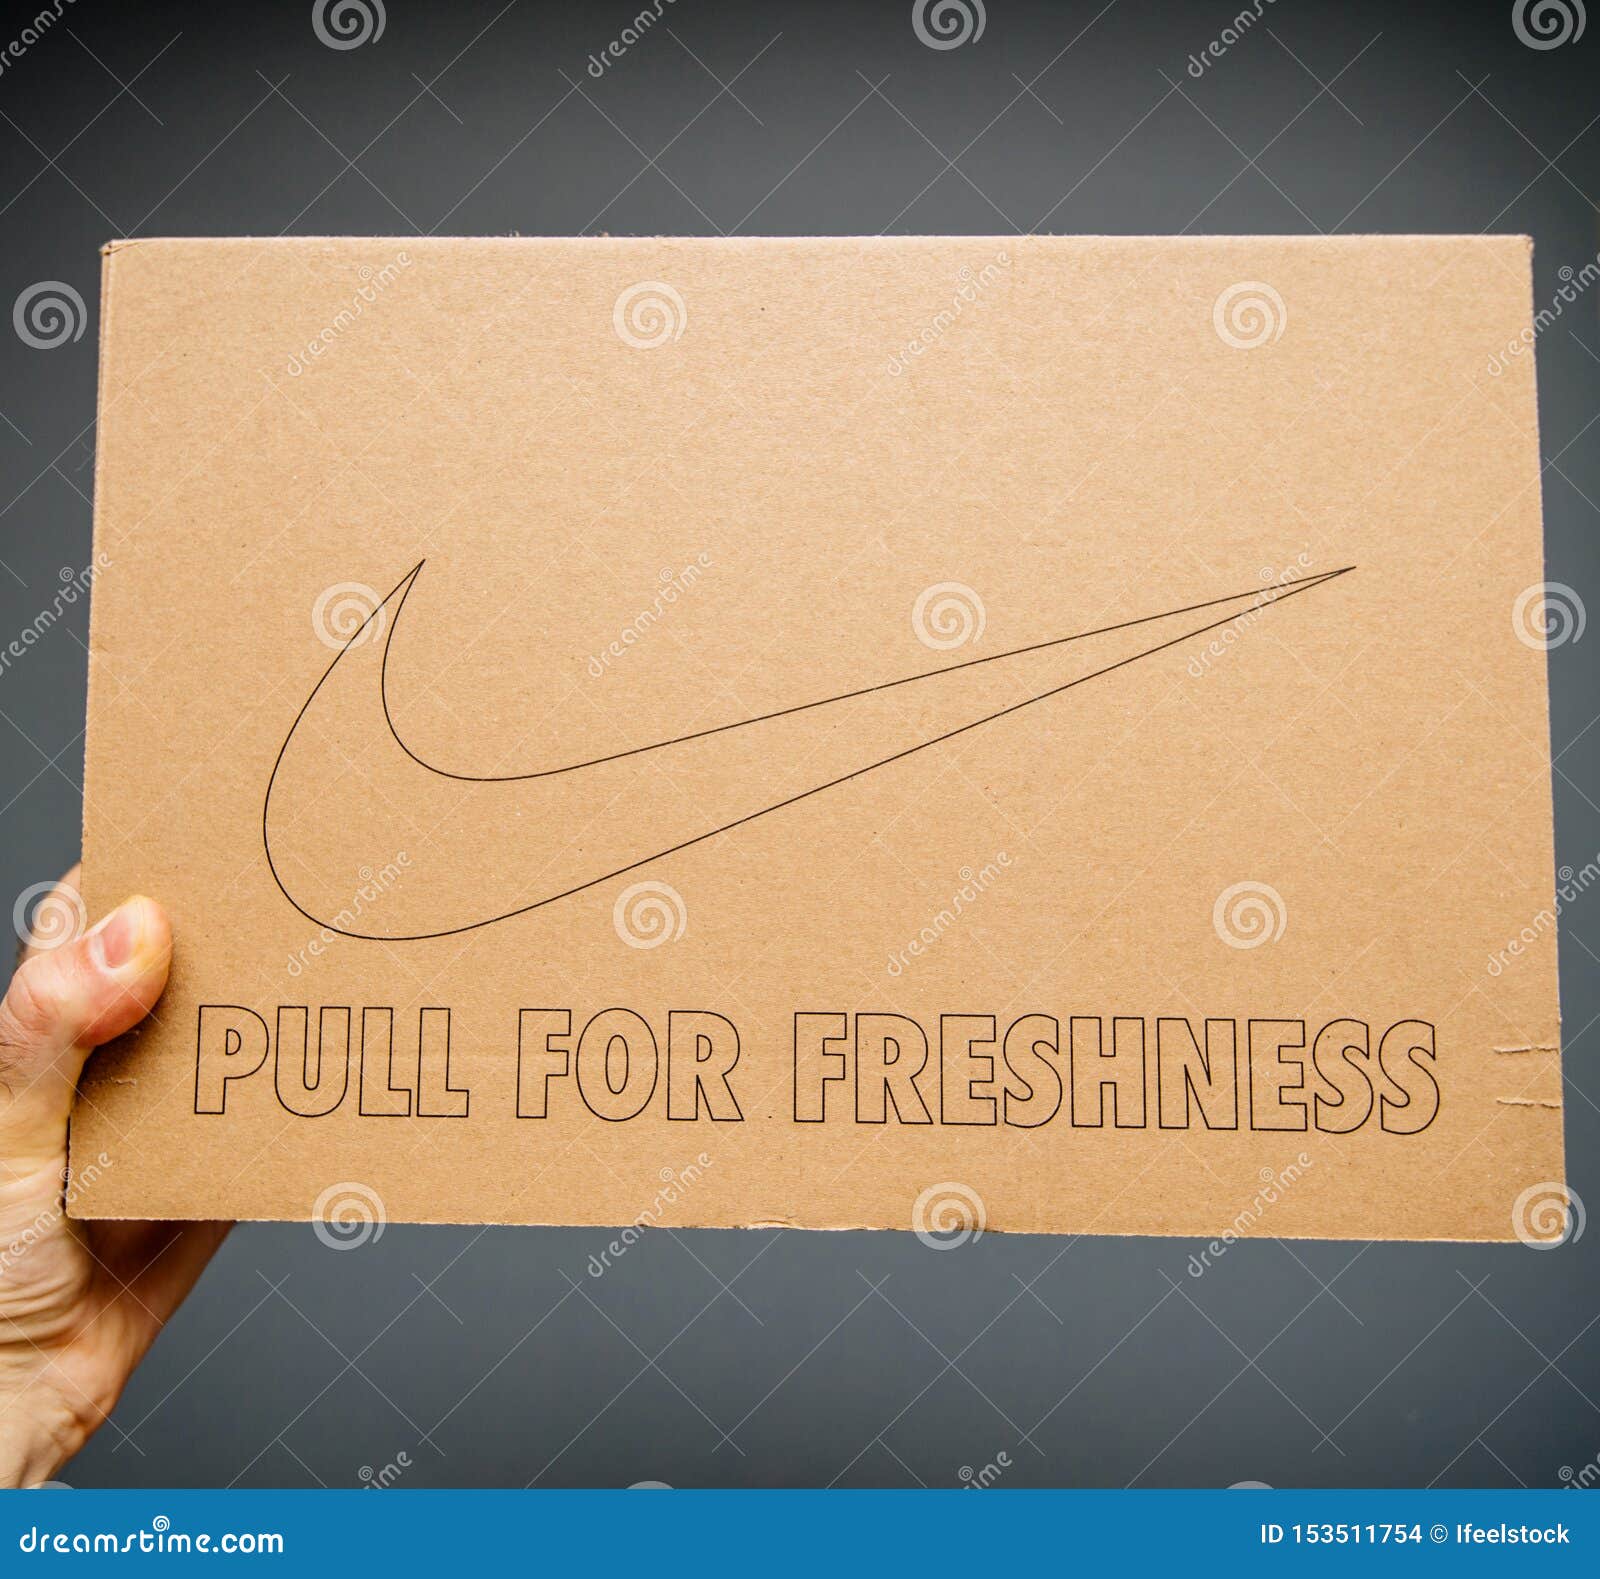 Pull for Freshness and Logotype of Nike Man Hand Editorial Stock Image - Image of advertisement, cardboard: 153511754